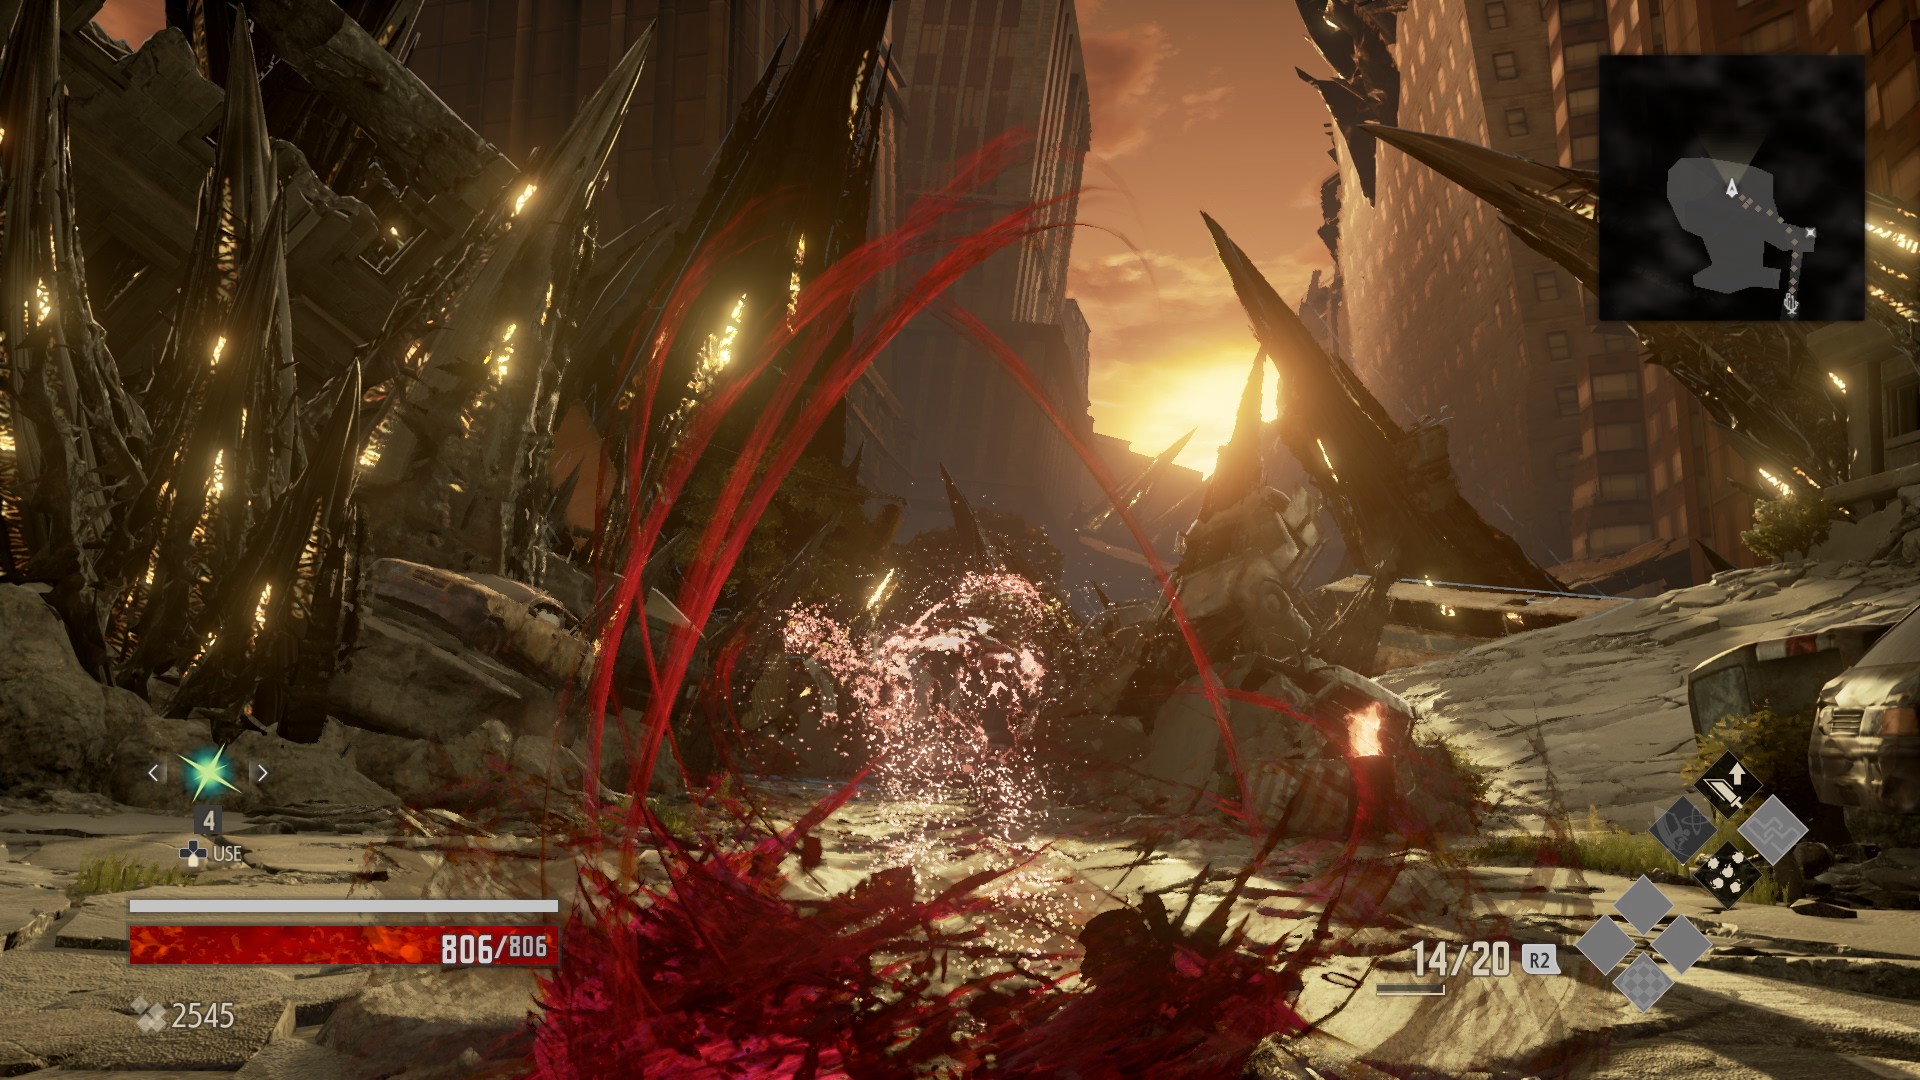 Code Vein Gets 13 Minutes of New Gameplay Footage